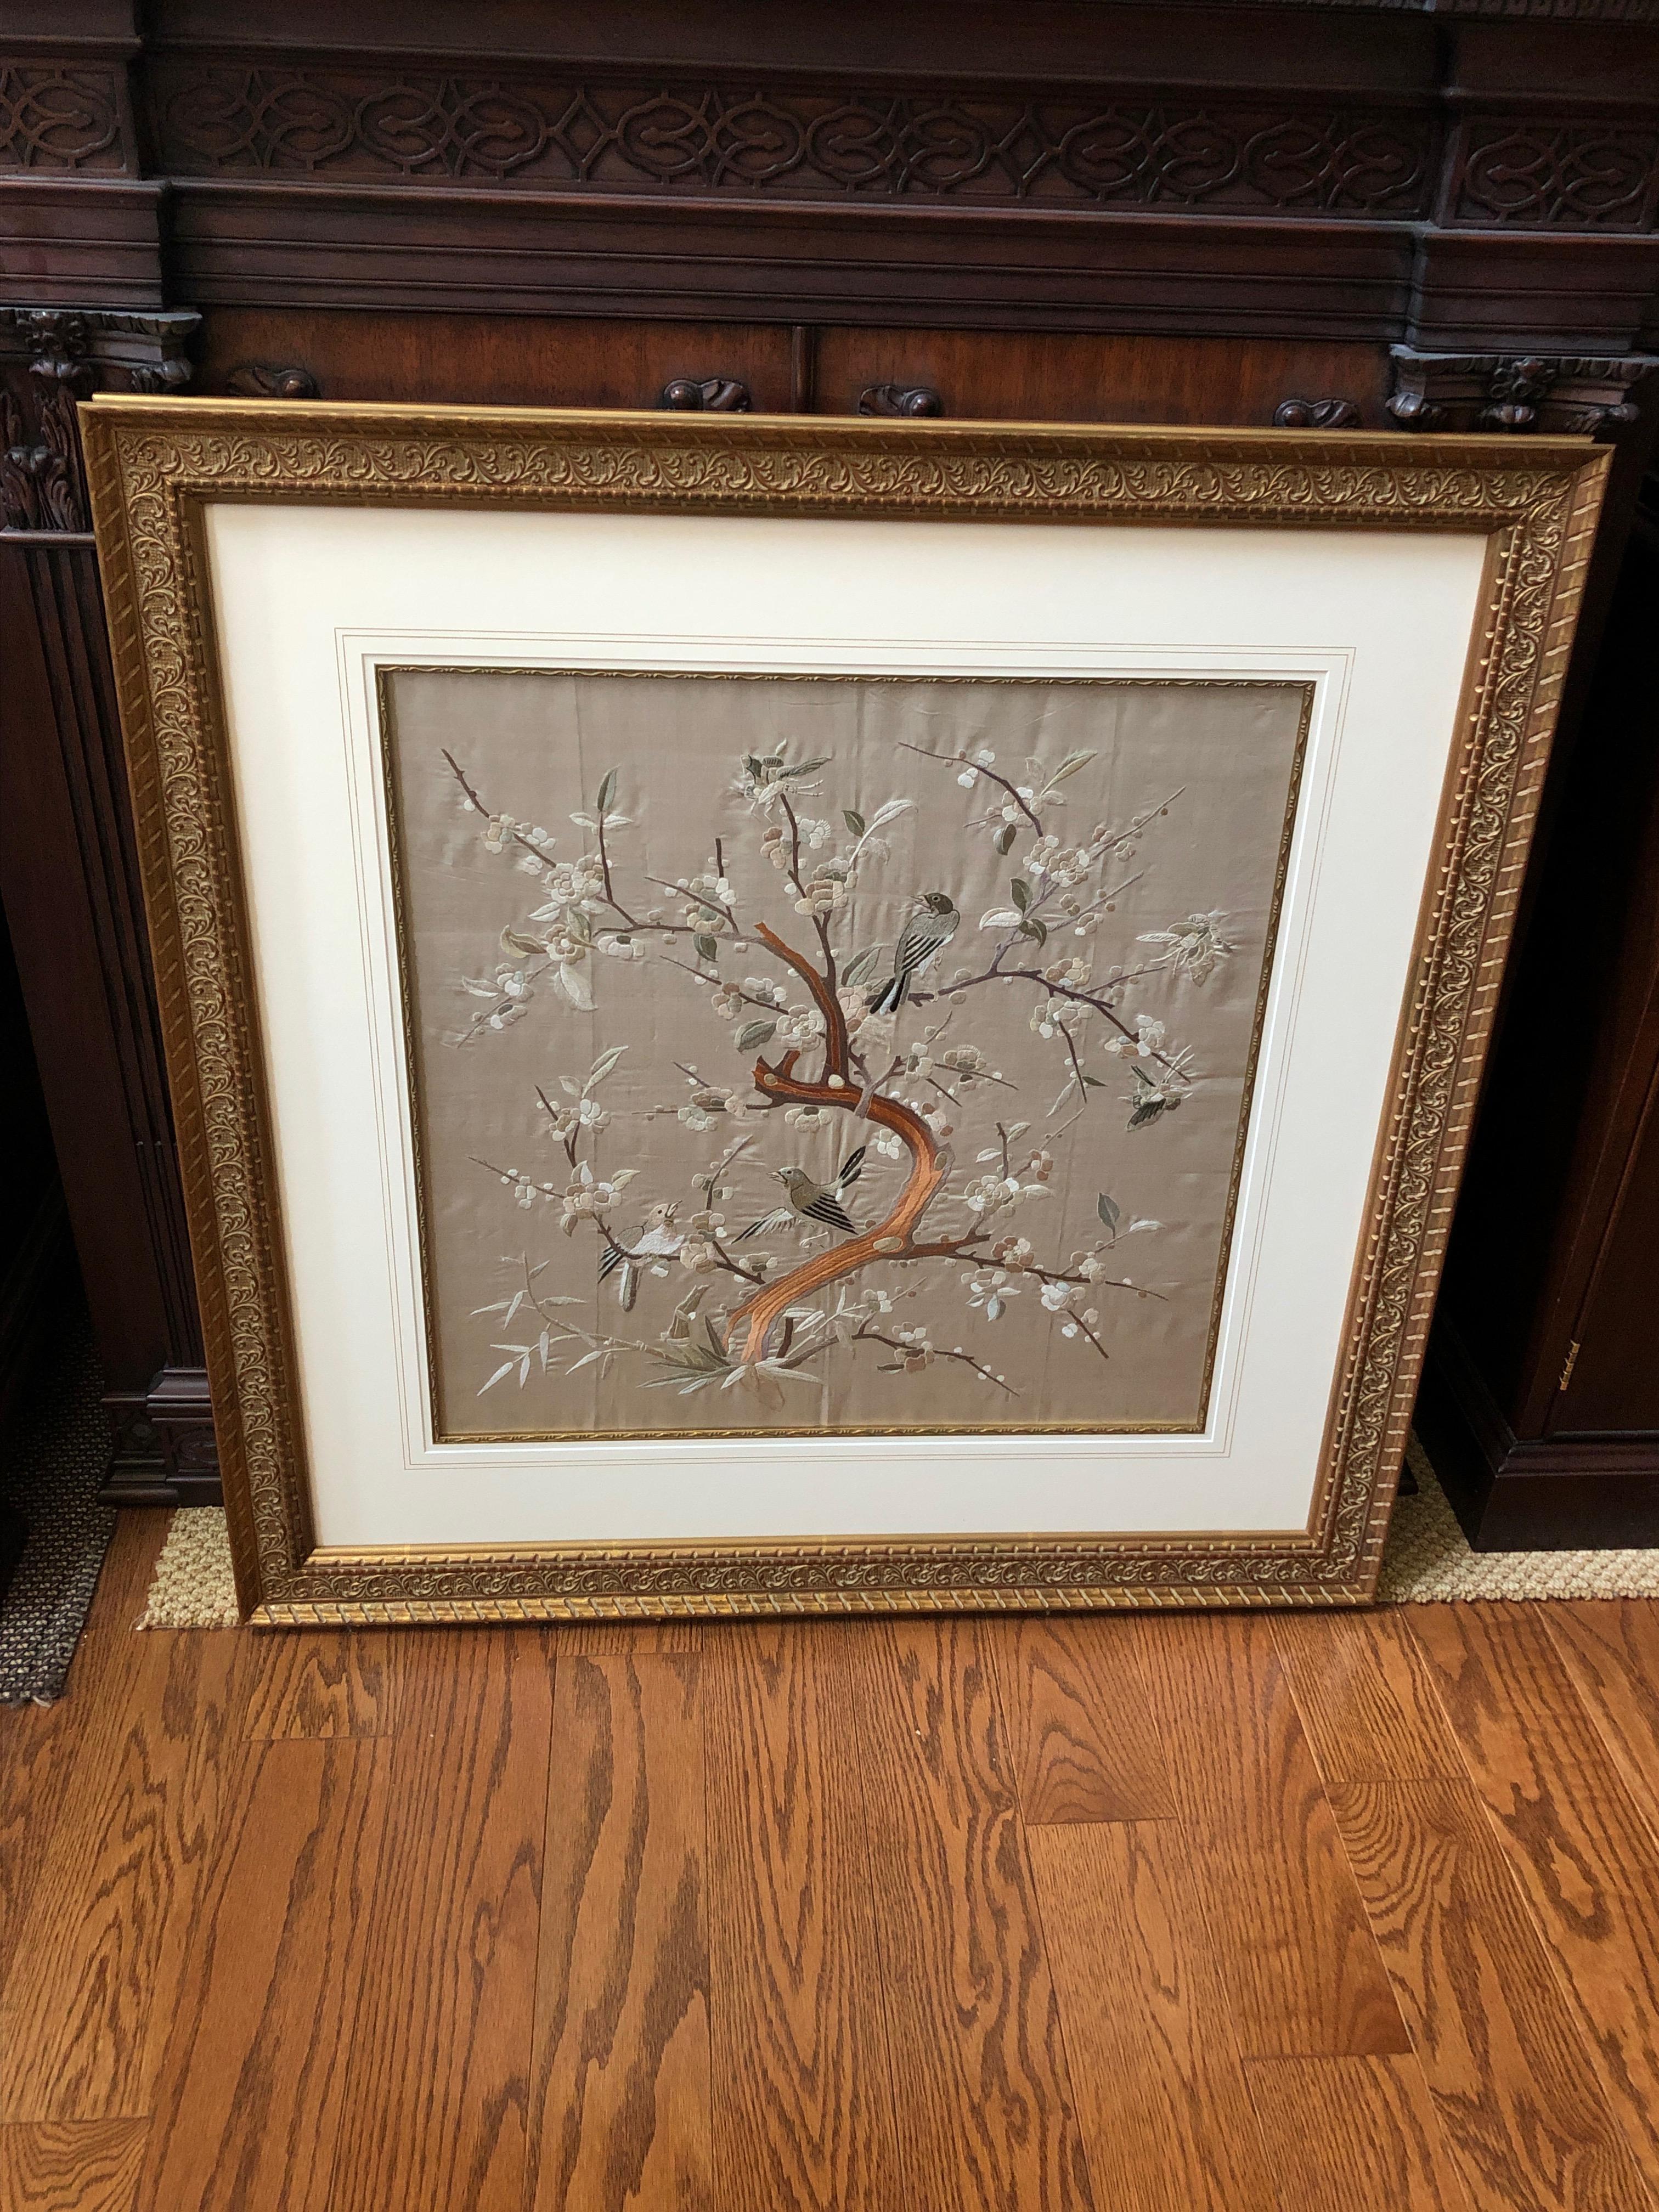 A beautifully refined piece of wall art consisting of a framed vintage Japanese embroidery having lovely grey silk background with birds and foliage. The textile is framed exquisitely with interior gold filet, wide linen mat and giltwood molding.